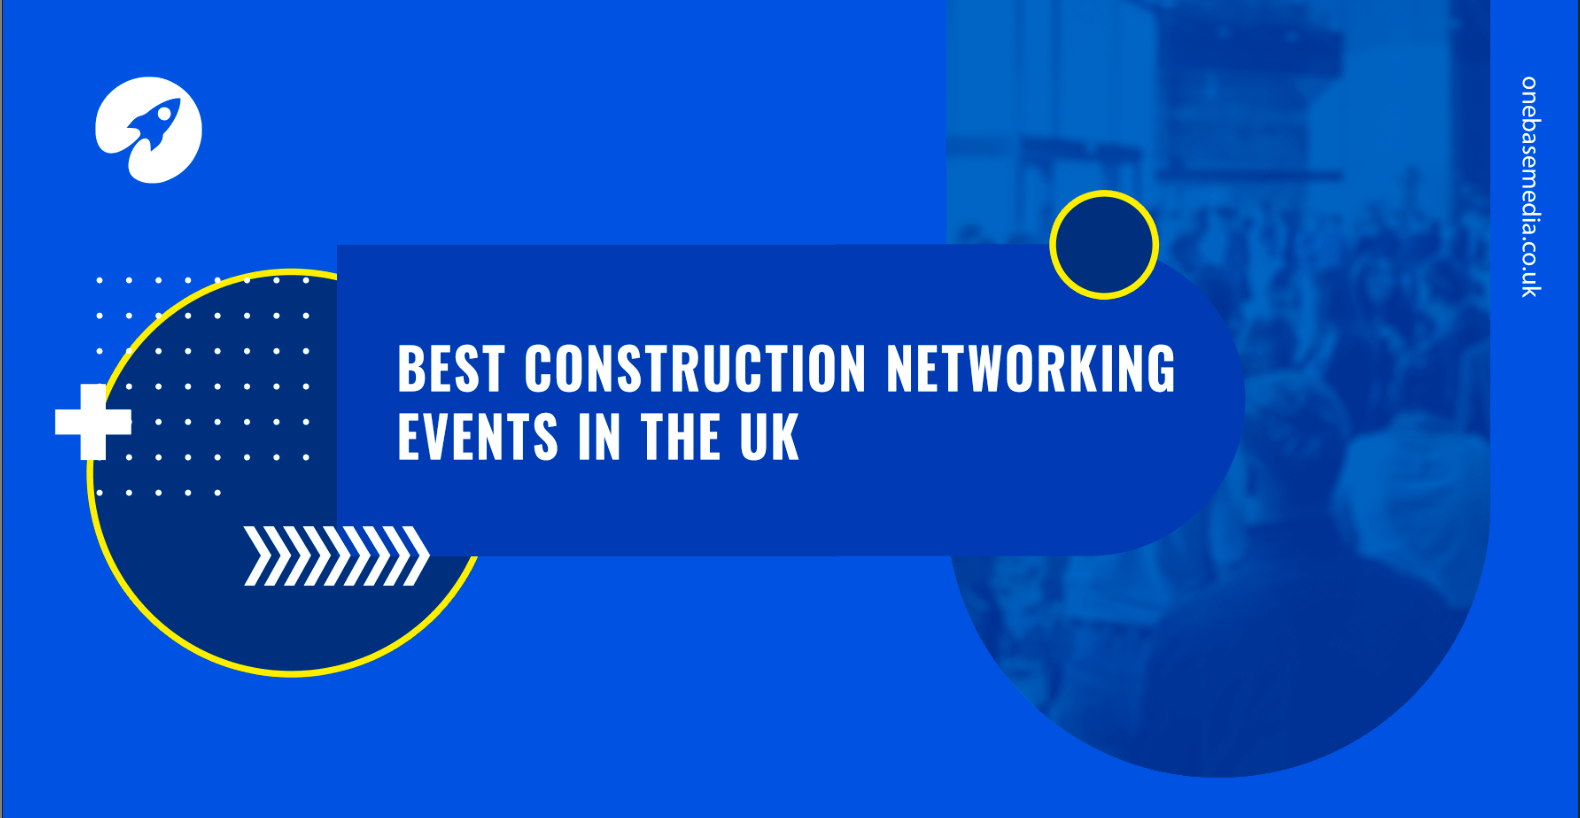 Best construction networking events in the UK